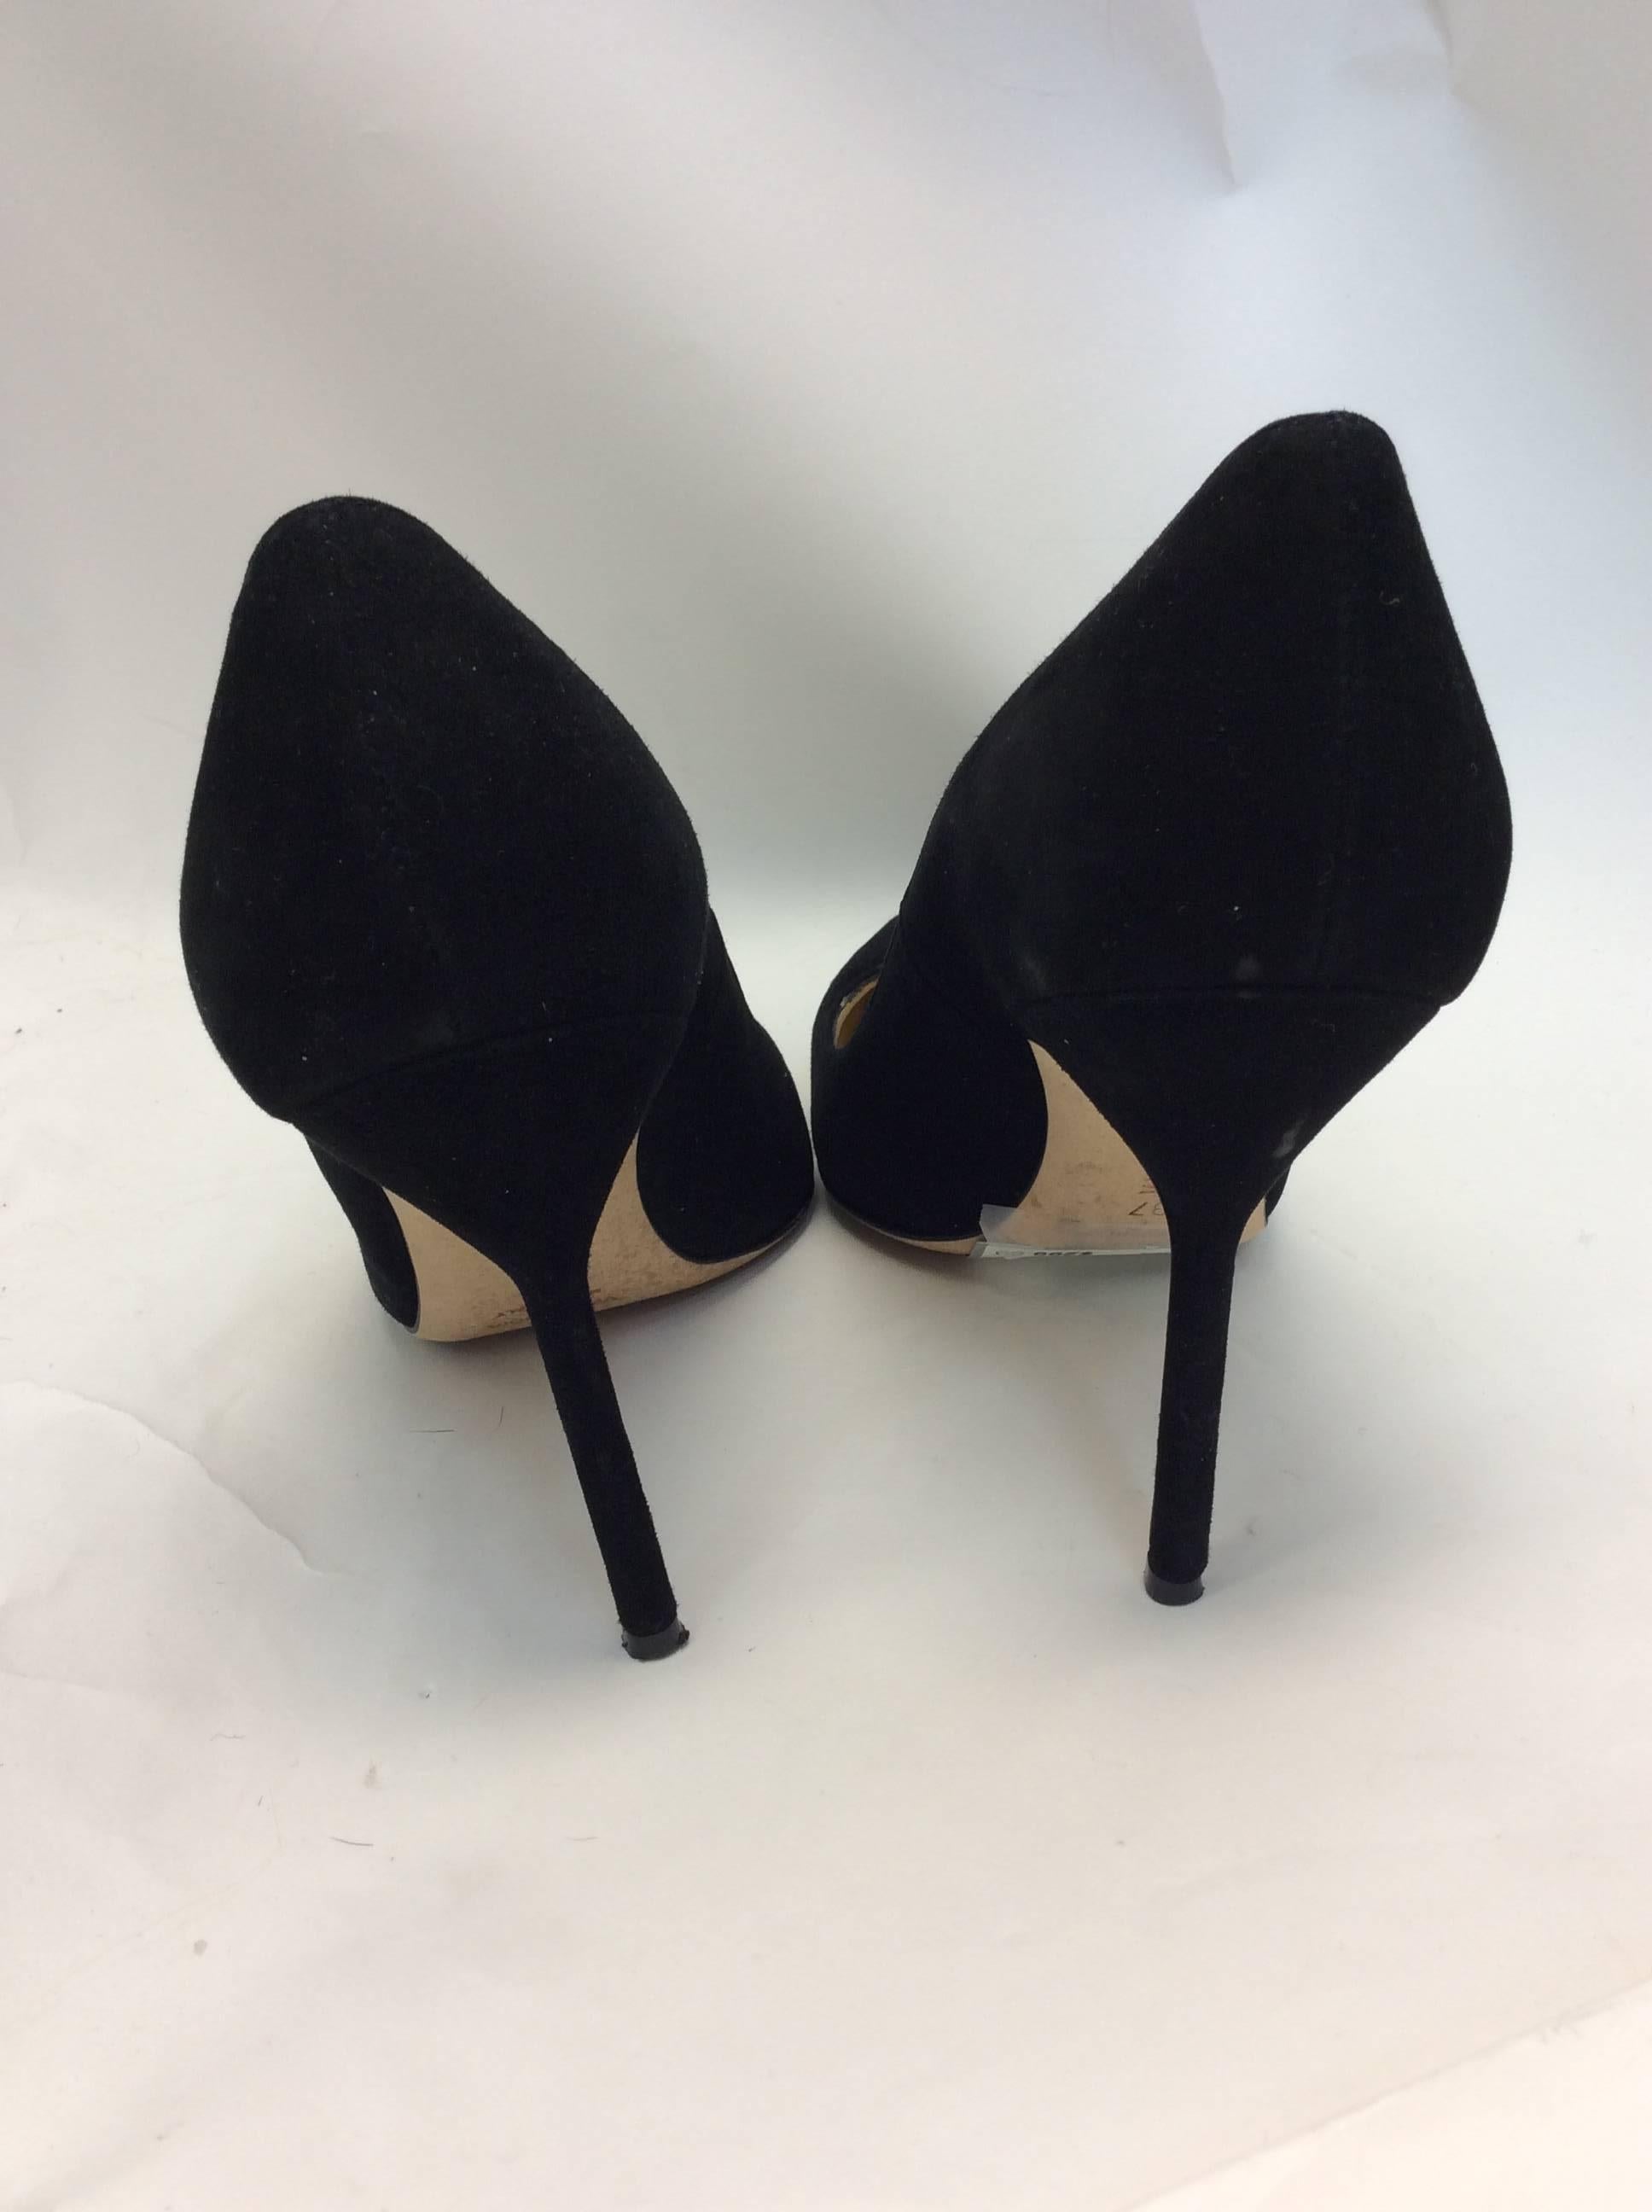 Manolo Blahnik Black Suede Pumps In Excellent Condition For Sale In Narberth, PA